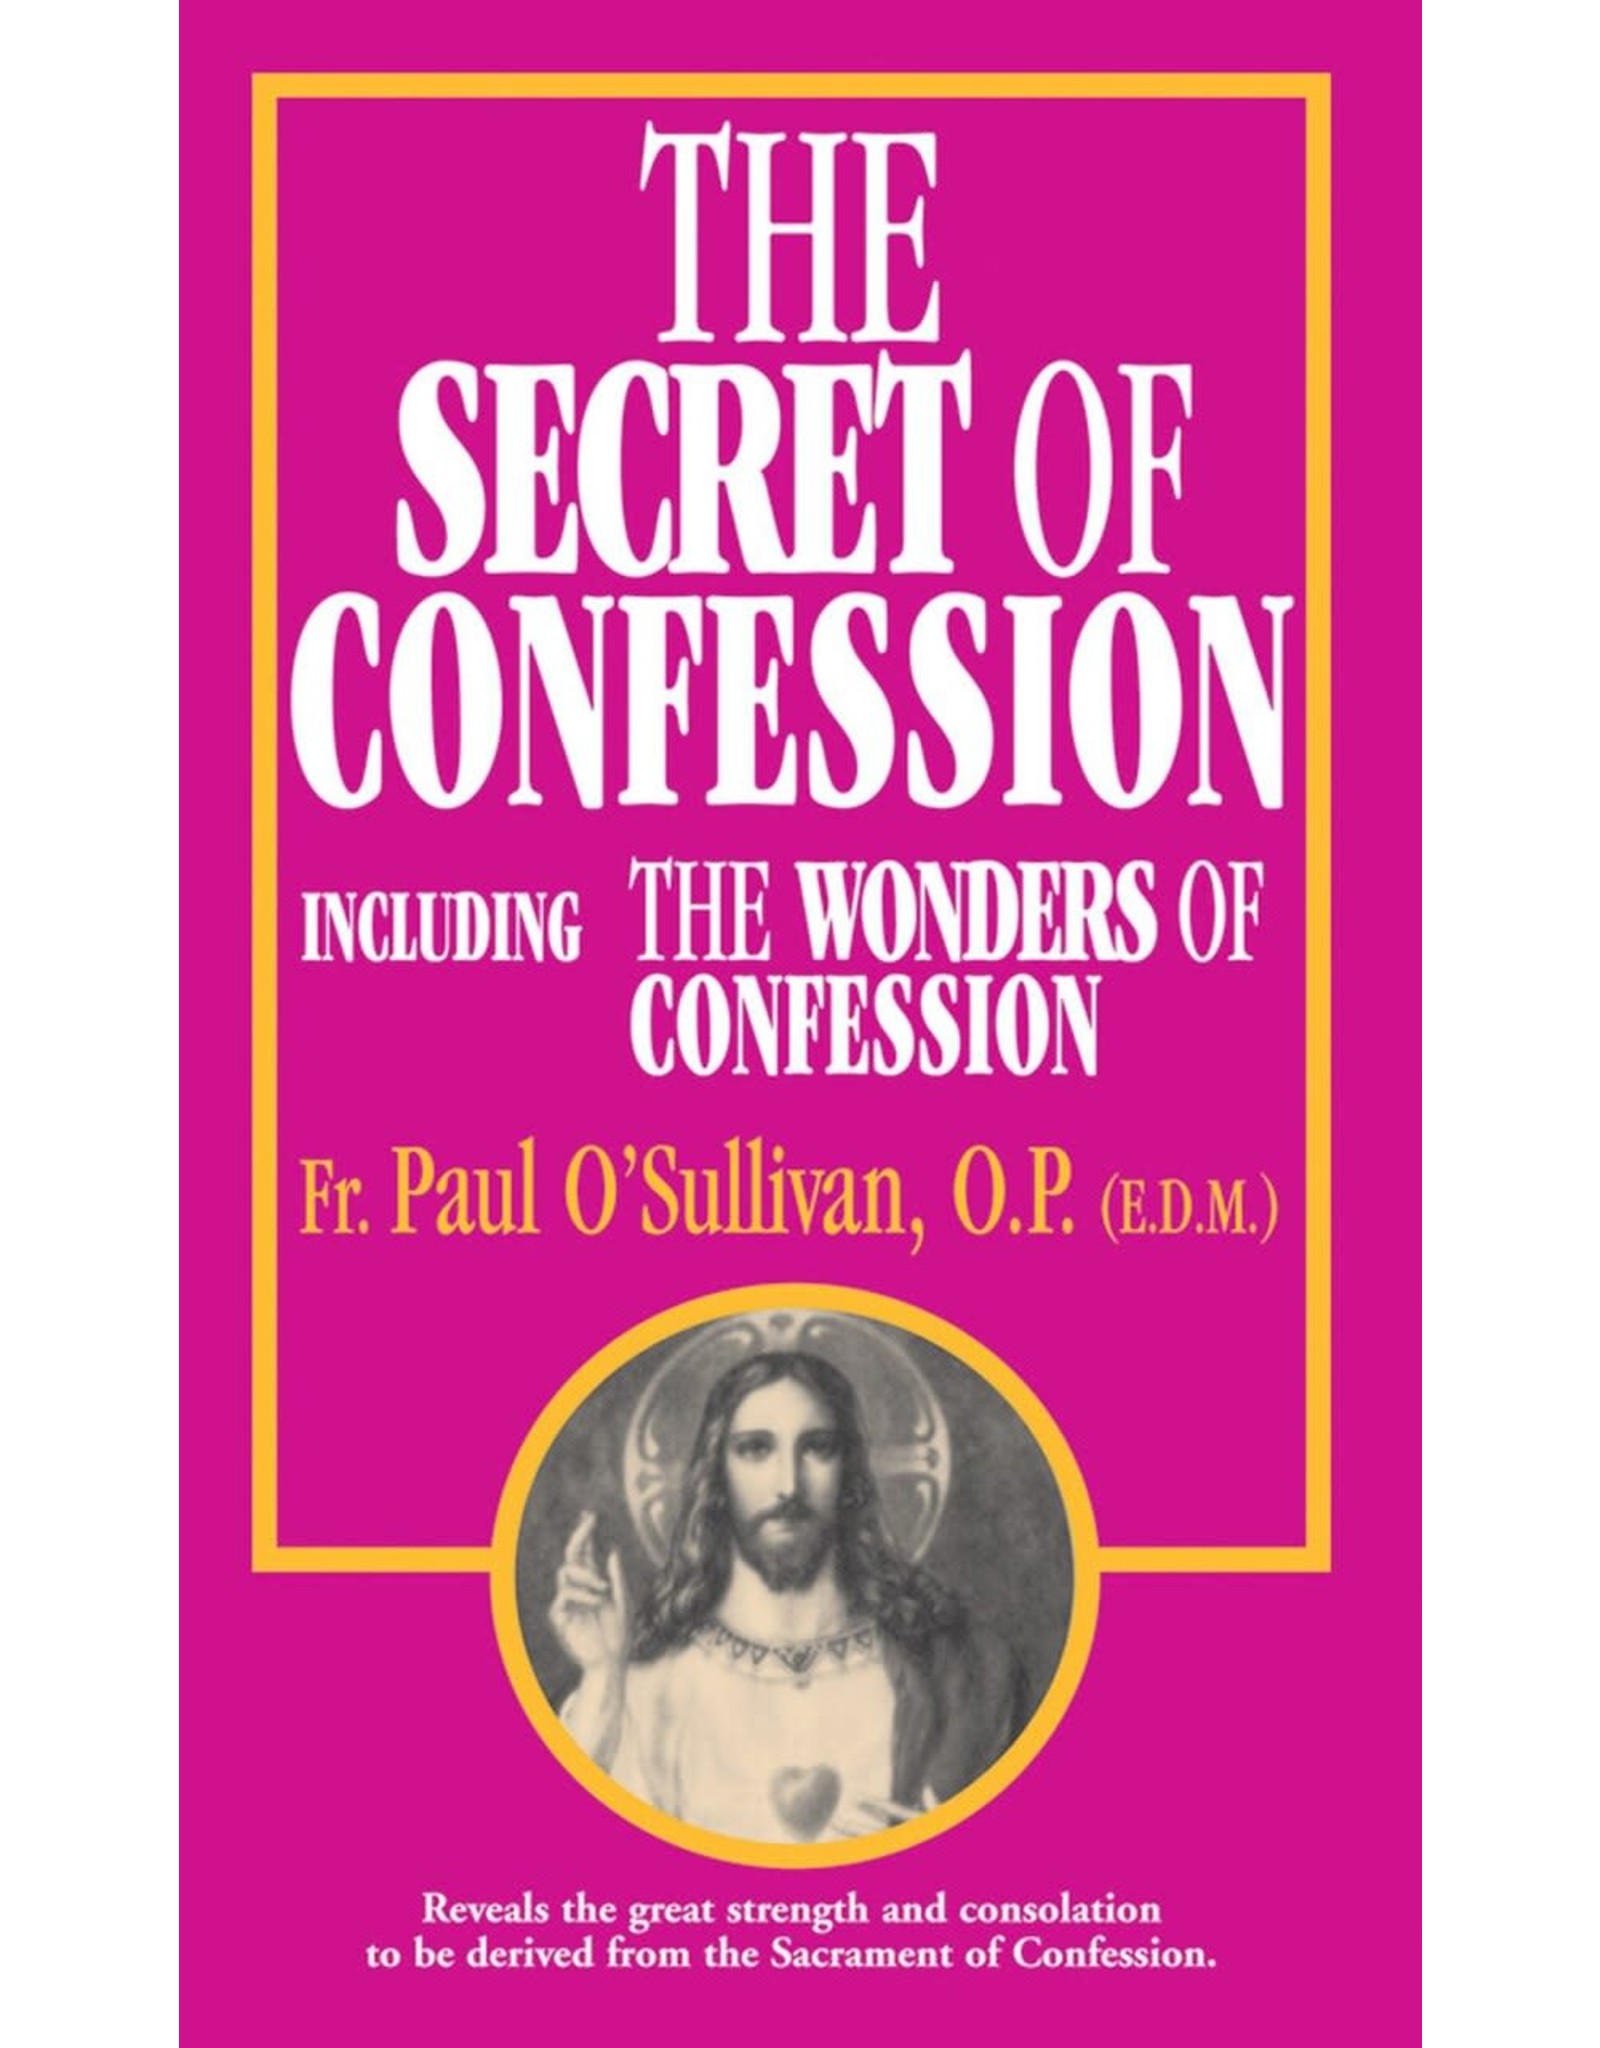 Tan Books The Secret Of Confession: Including The Wonders Of Confession by Rev. Fr. Paul O'Sullivan, O.P. (E.D.M.) (Booklet)